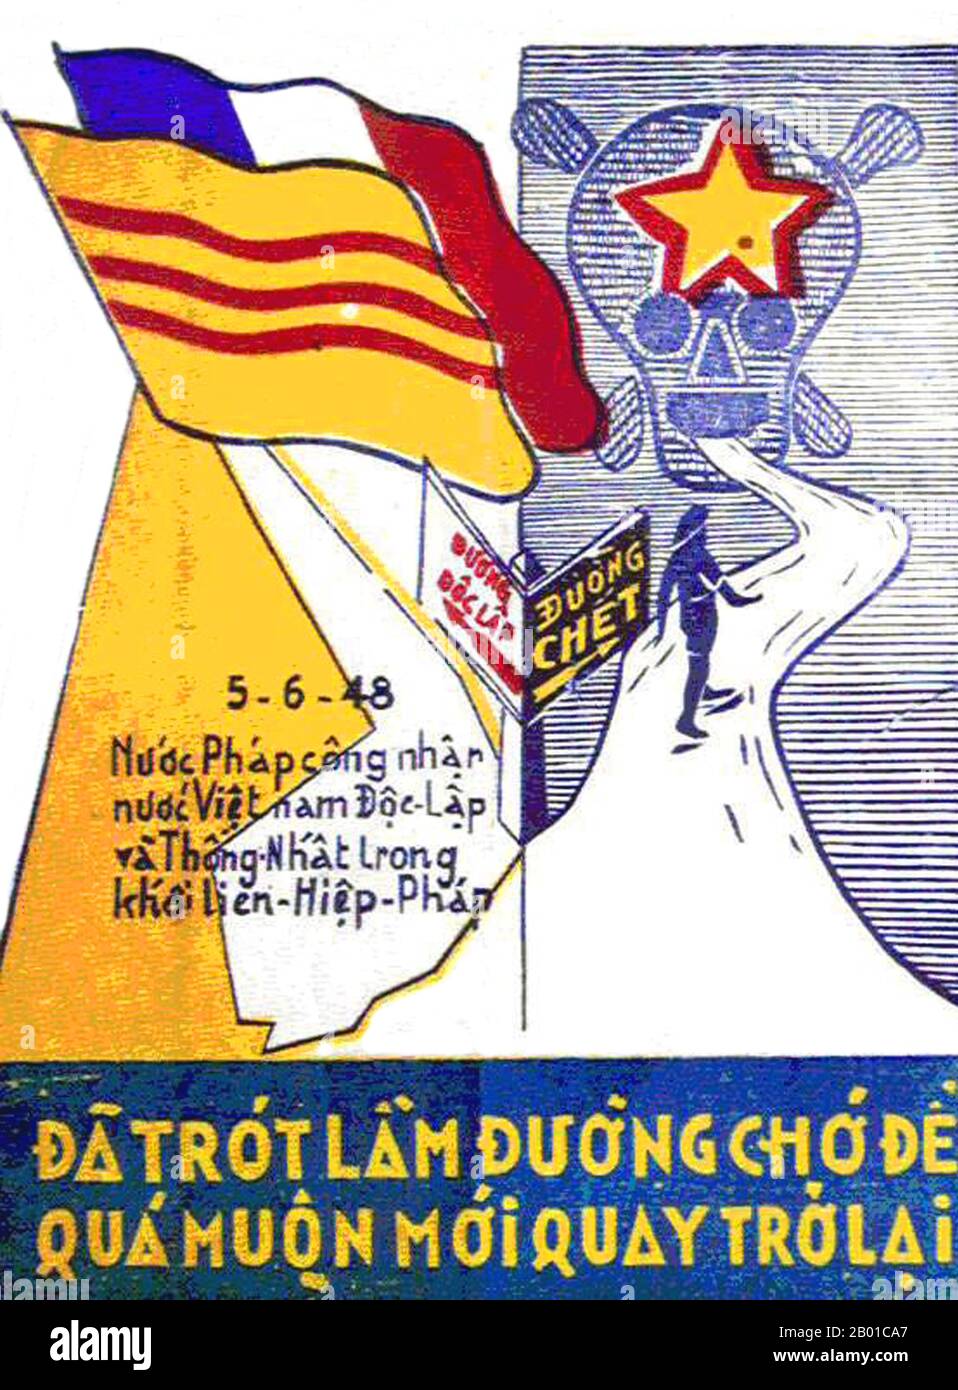 Vietnam: Political propaganda poster, with the French and South Vietnamese flags signposted 'To Independence' and the Communist skull-and-cross bones signposted 'To Death', 1948.  On May 27, 1948, Nguyễn Văn Xuân, then President of the Republic of Cochinchina, became President of the rightist Provisional Central Government of Vietnam (Thủ tướng lâm thời) following the merging of the government of Cochin China and Vietnam. Nguyễn Văn Xuân later went into exile in France, where he died in 1989. Stock Photo